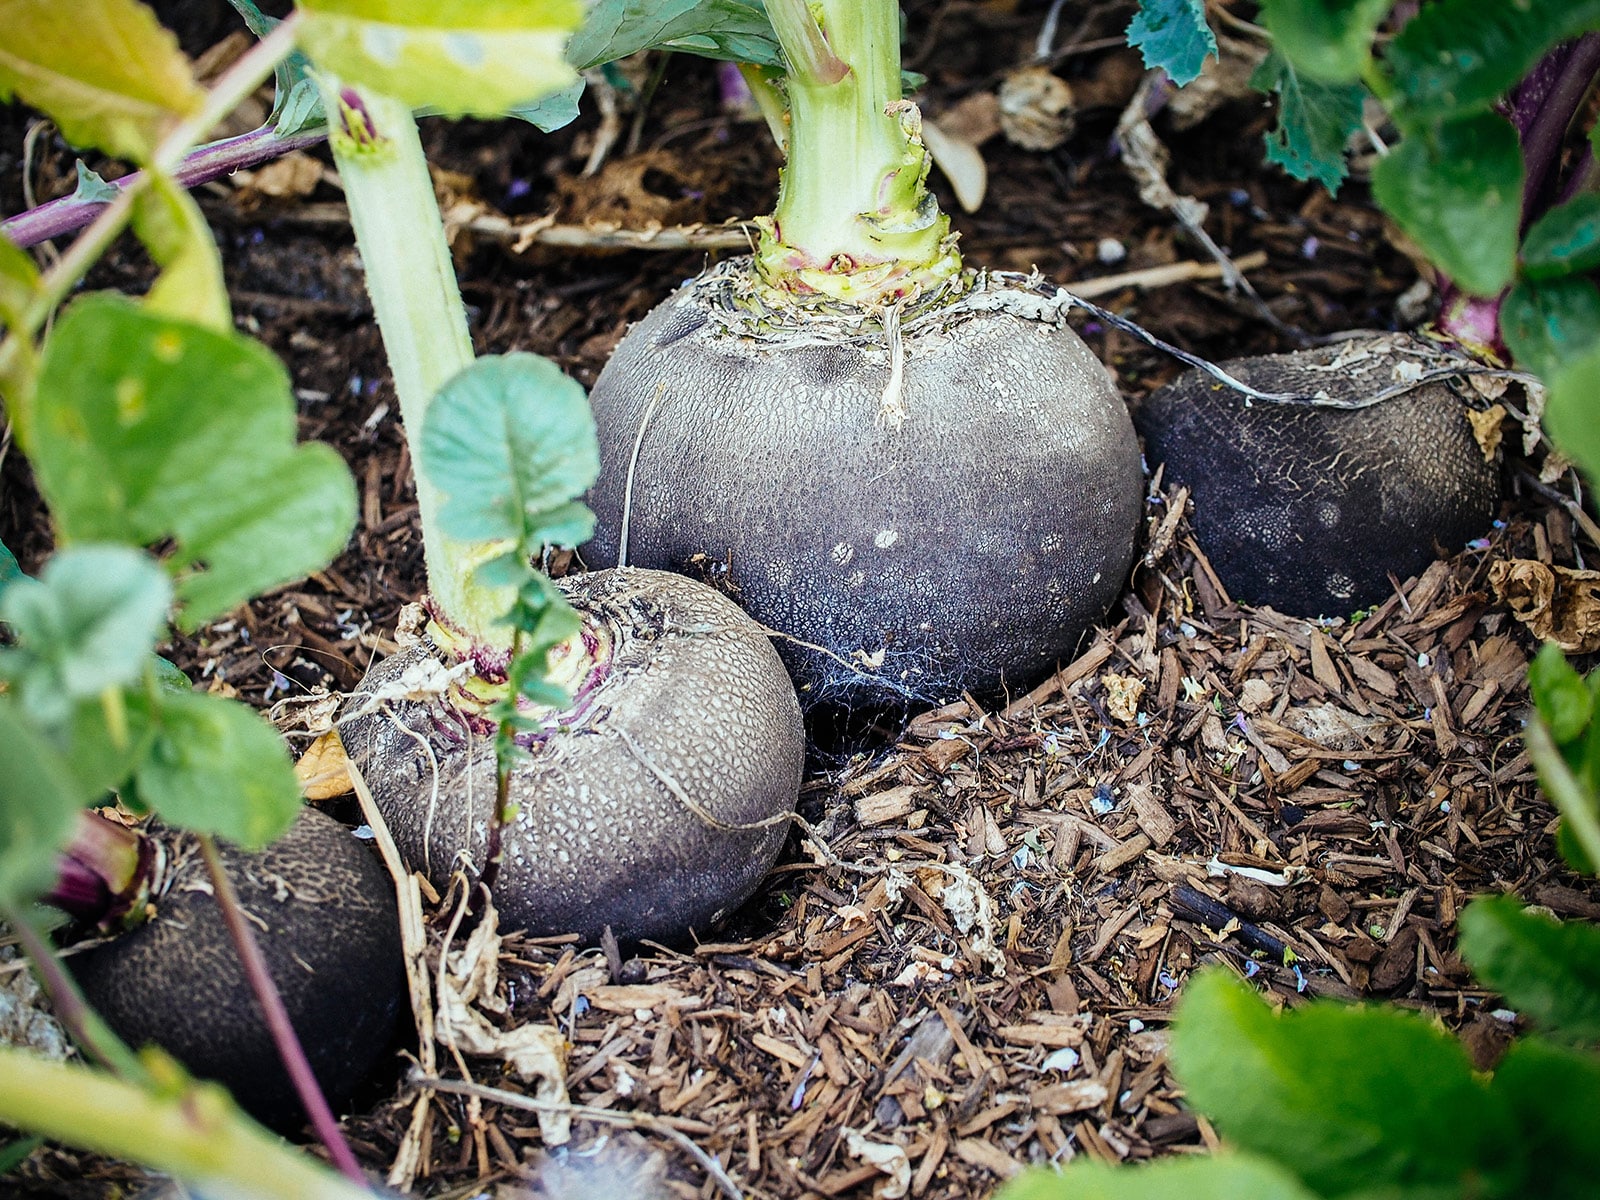 Four Black Spanish Round winter radishes emerging from the soil in a garden bed